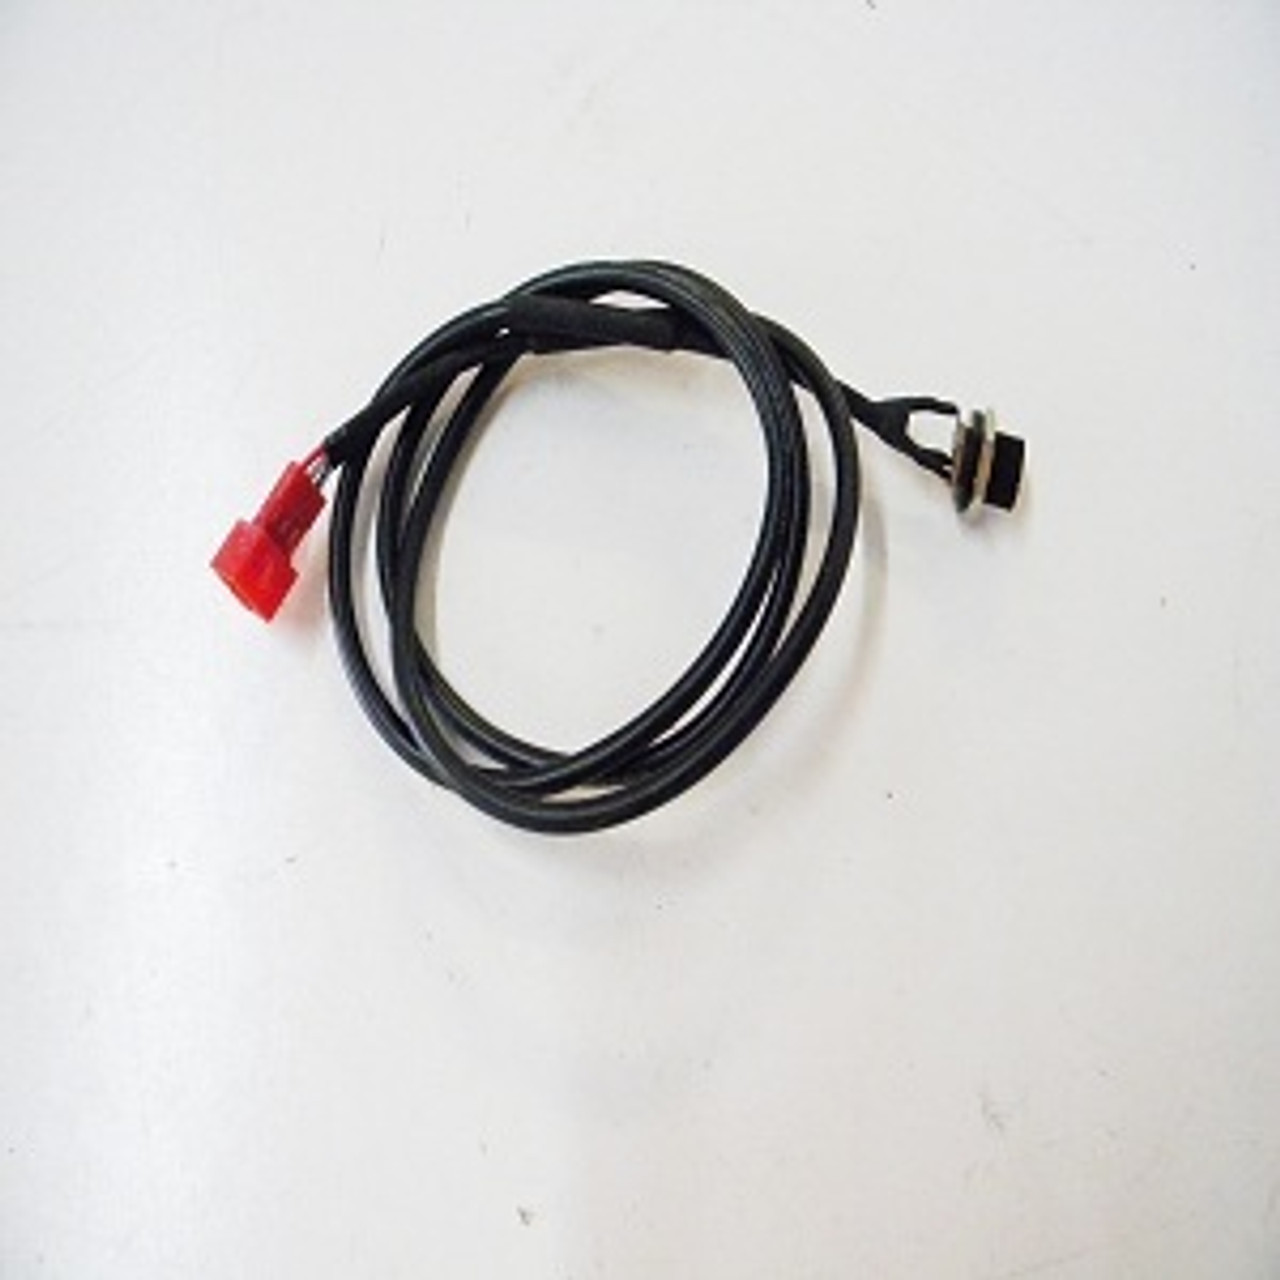 Upright Bike Power Jack Wire Part Number 244821